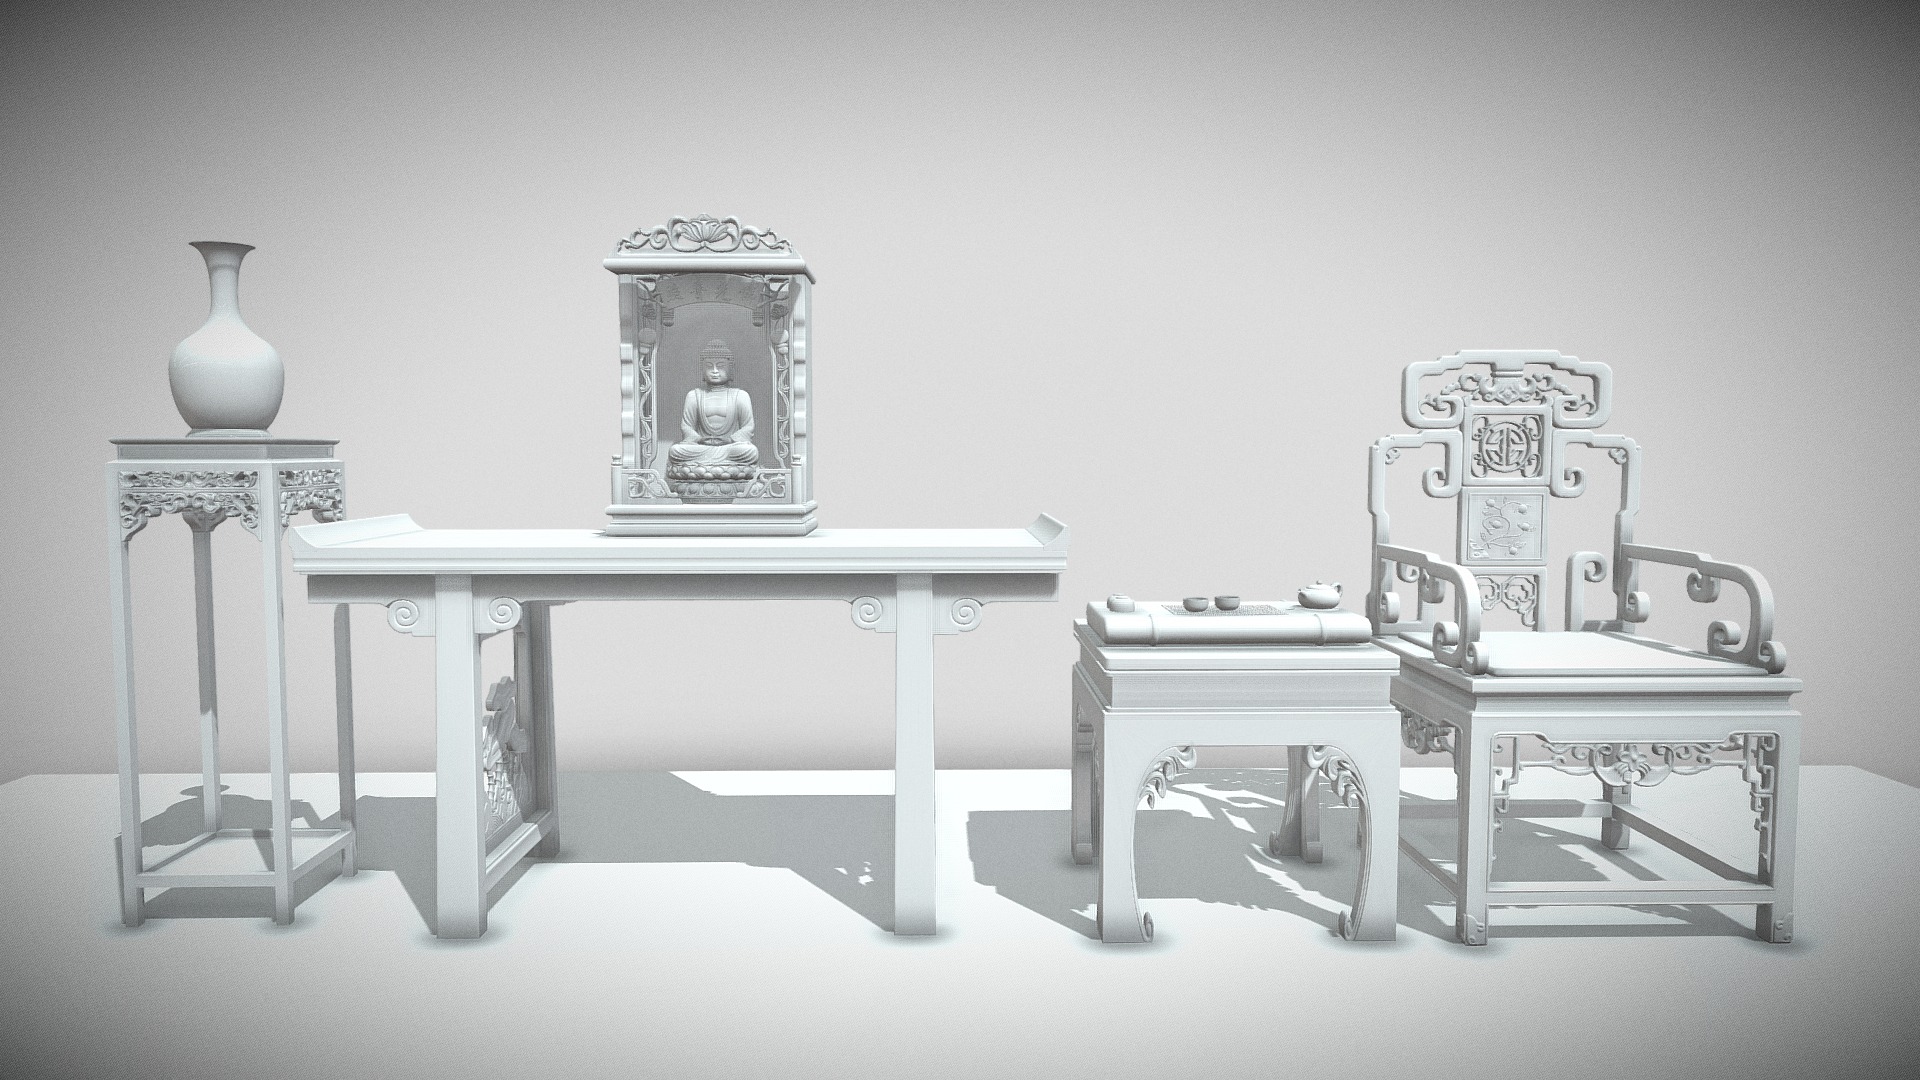 3D model Chinese Buddhism - This is a 3D model of the Chinese Buddhism. The 3D model is about a table and chairs.